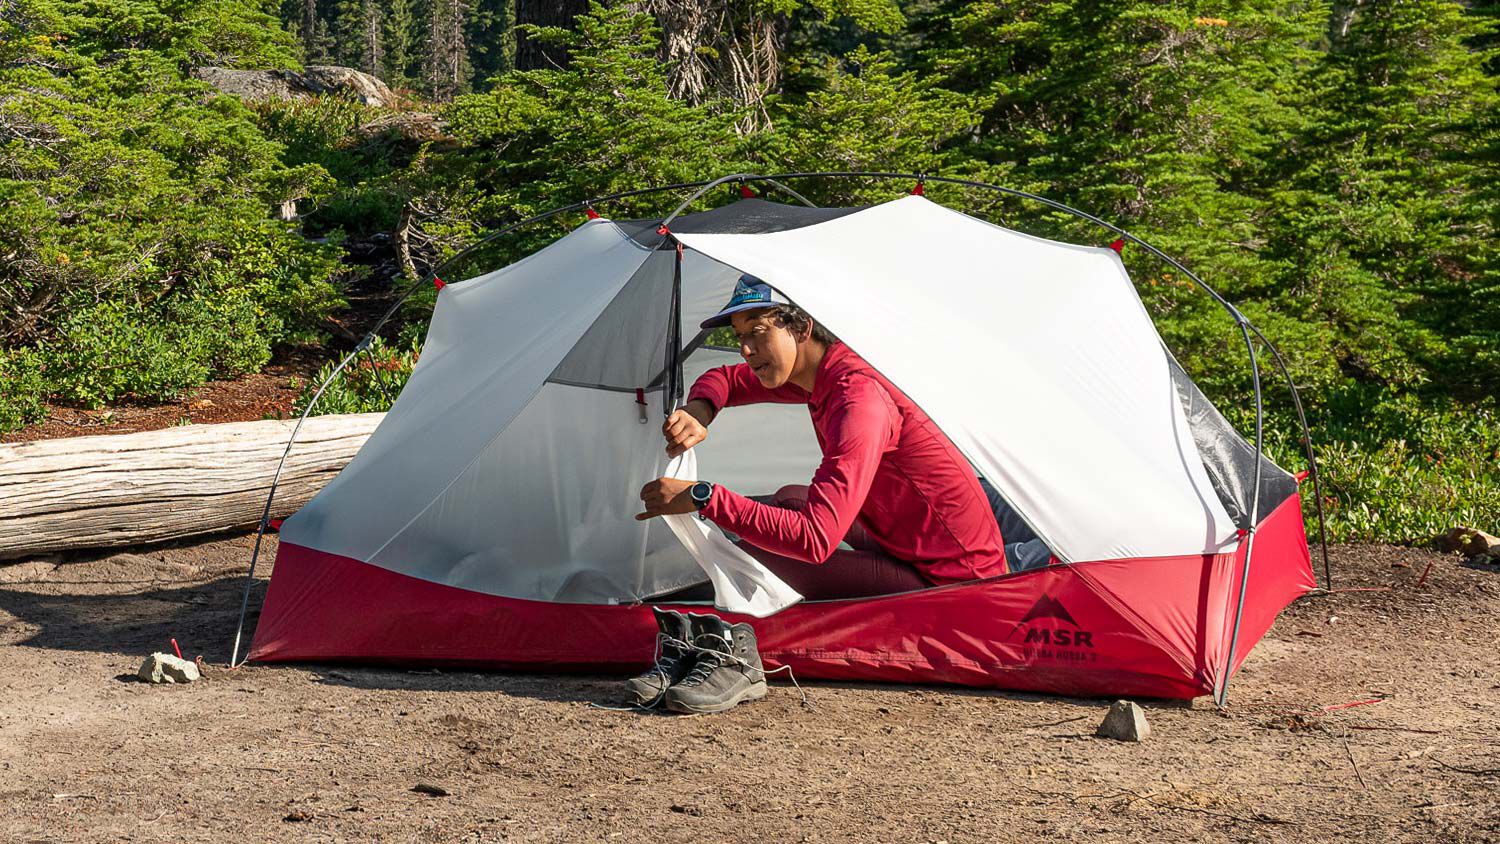 THE ULTIMATE GUIDE TO MSR TENTS